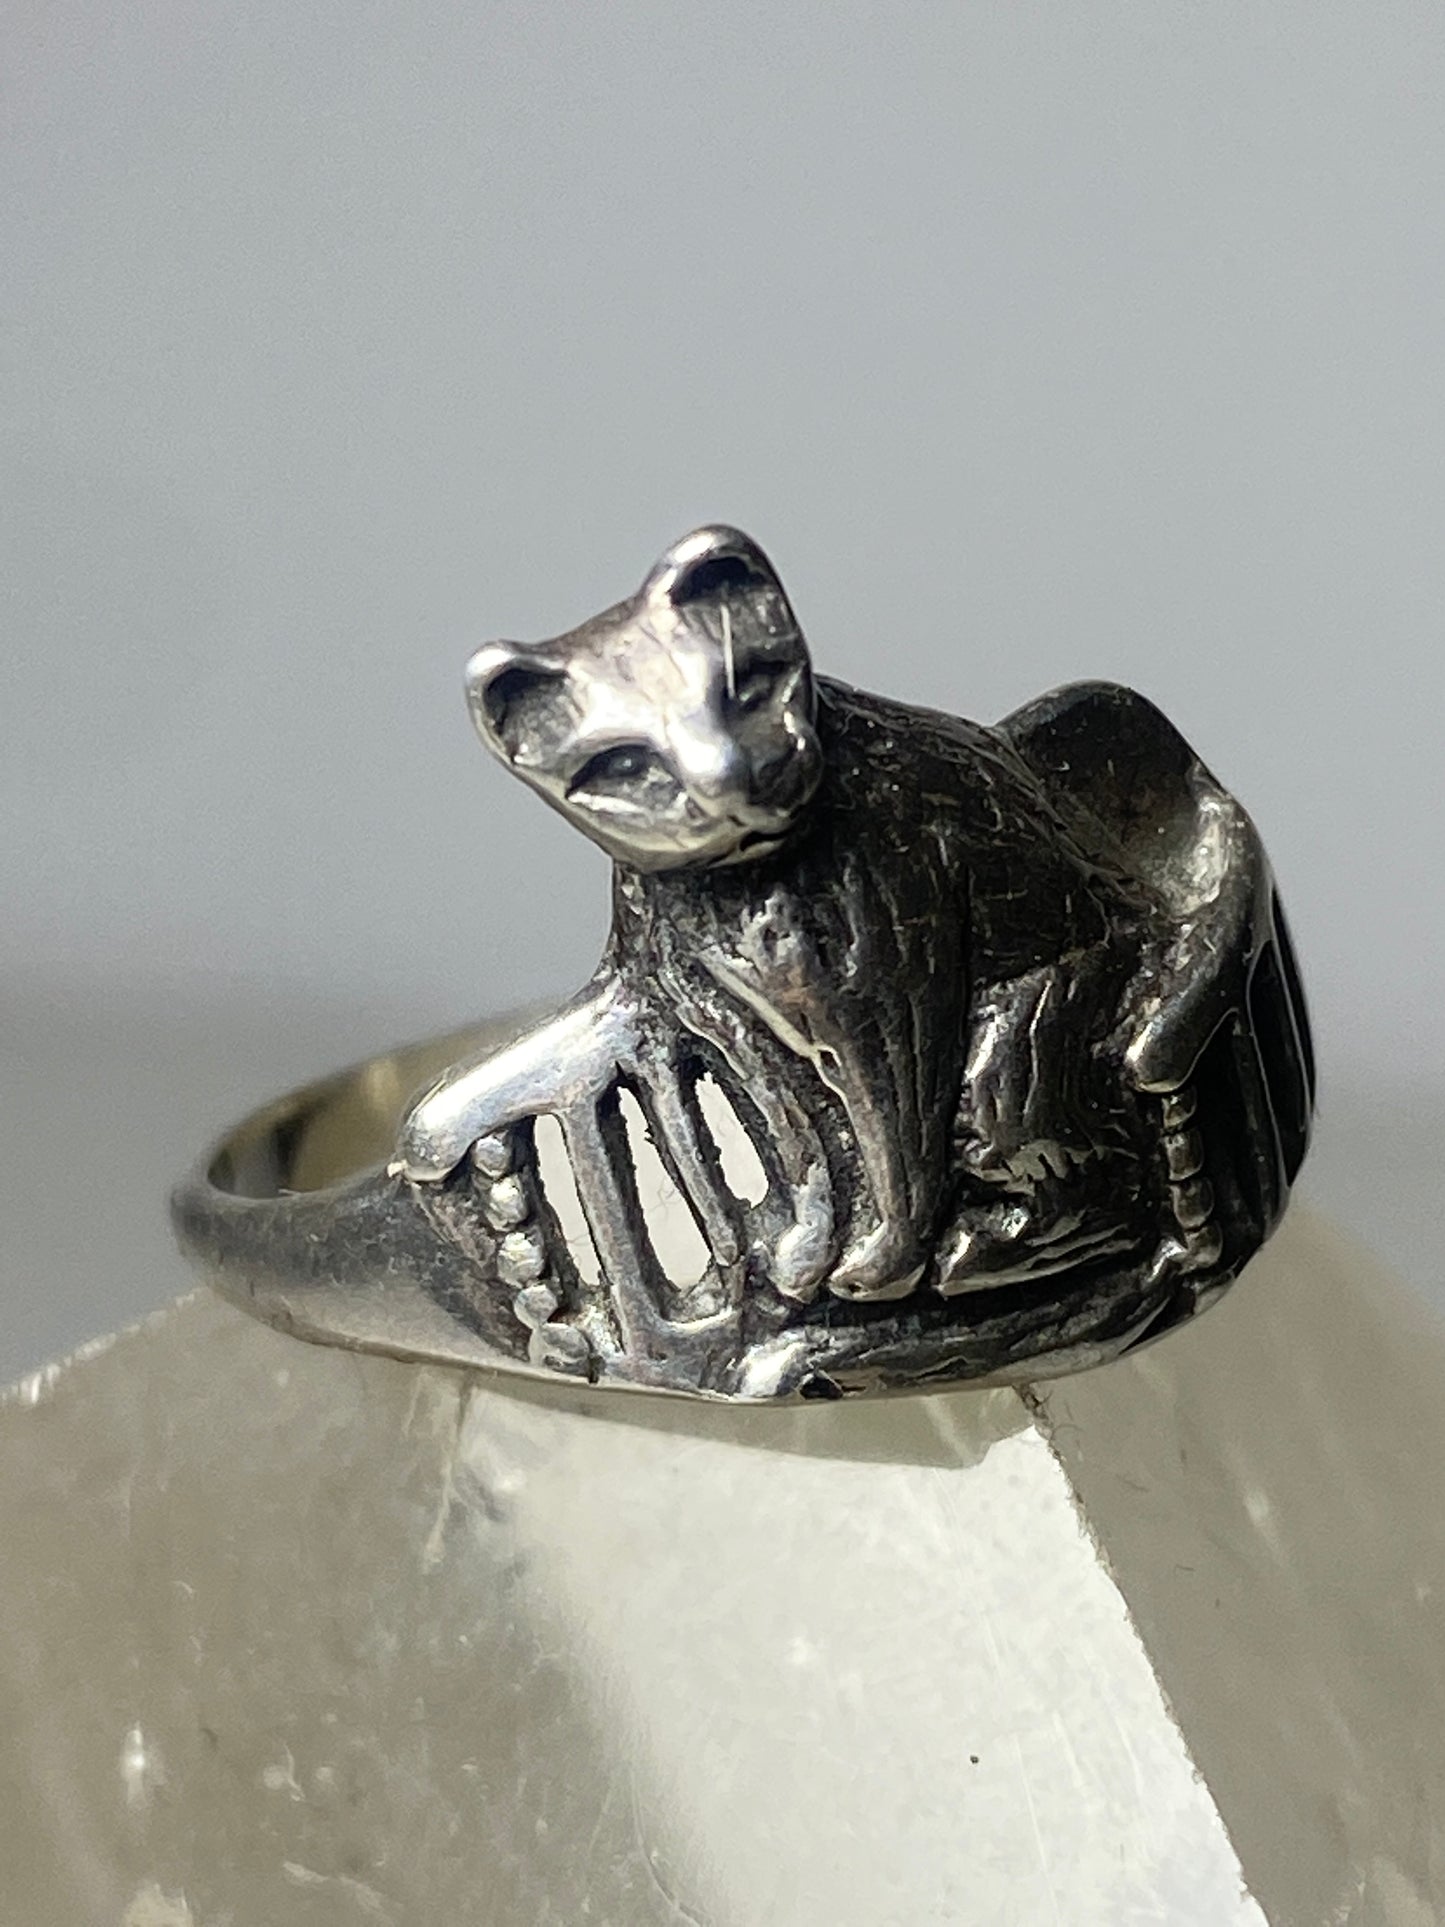 cat ring size 7 seated cat in chair sterling silver women girls